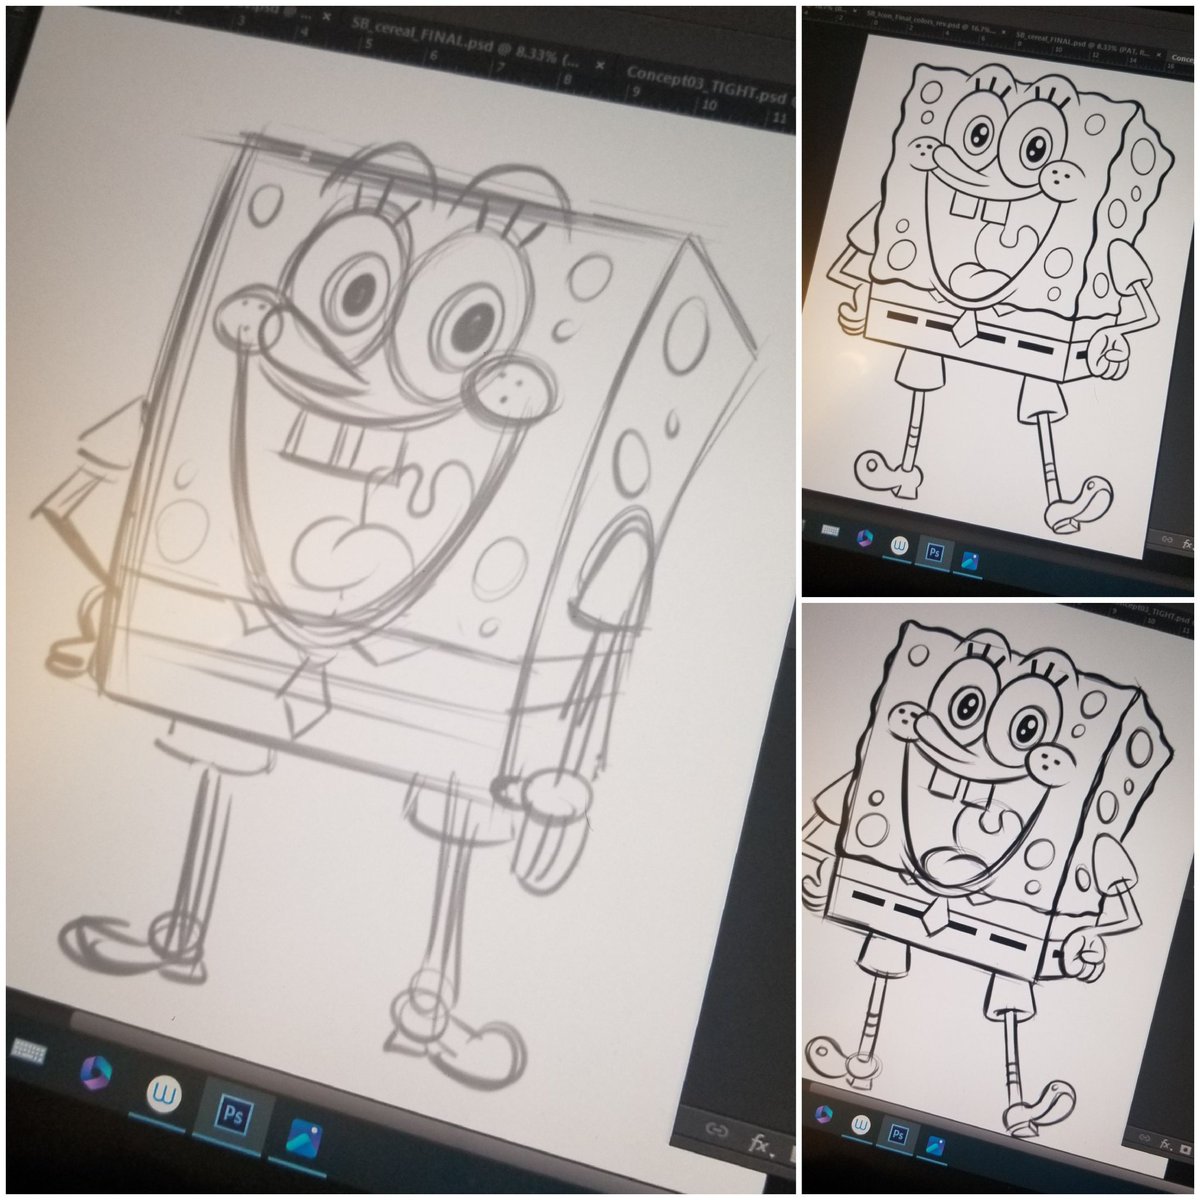 Okay...totally crazy. I found the original rough I sent for this press art pose. I had it in a vague folder on my hard drive called, 'January poses.' Thinking, 'Sure. I'll dig this up in 11 years and know exactly what I meant by that.' #spongebobart #spongebob @ArtofSpongebob